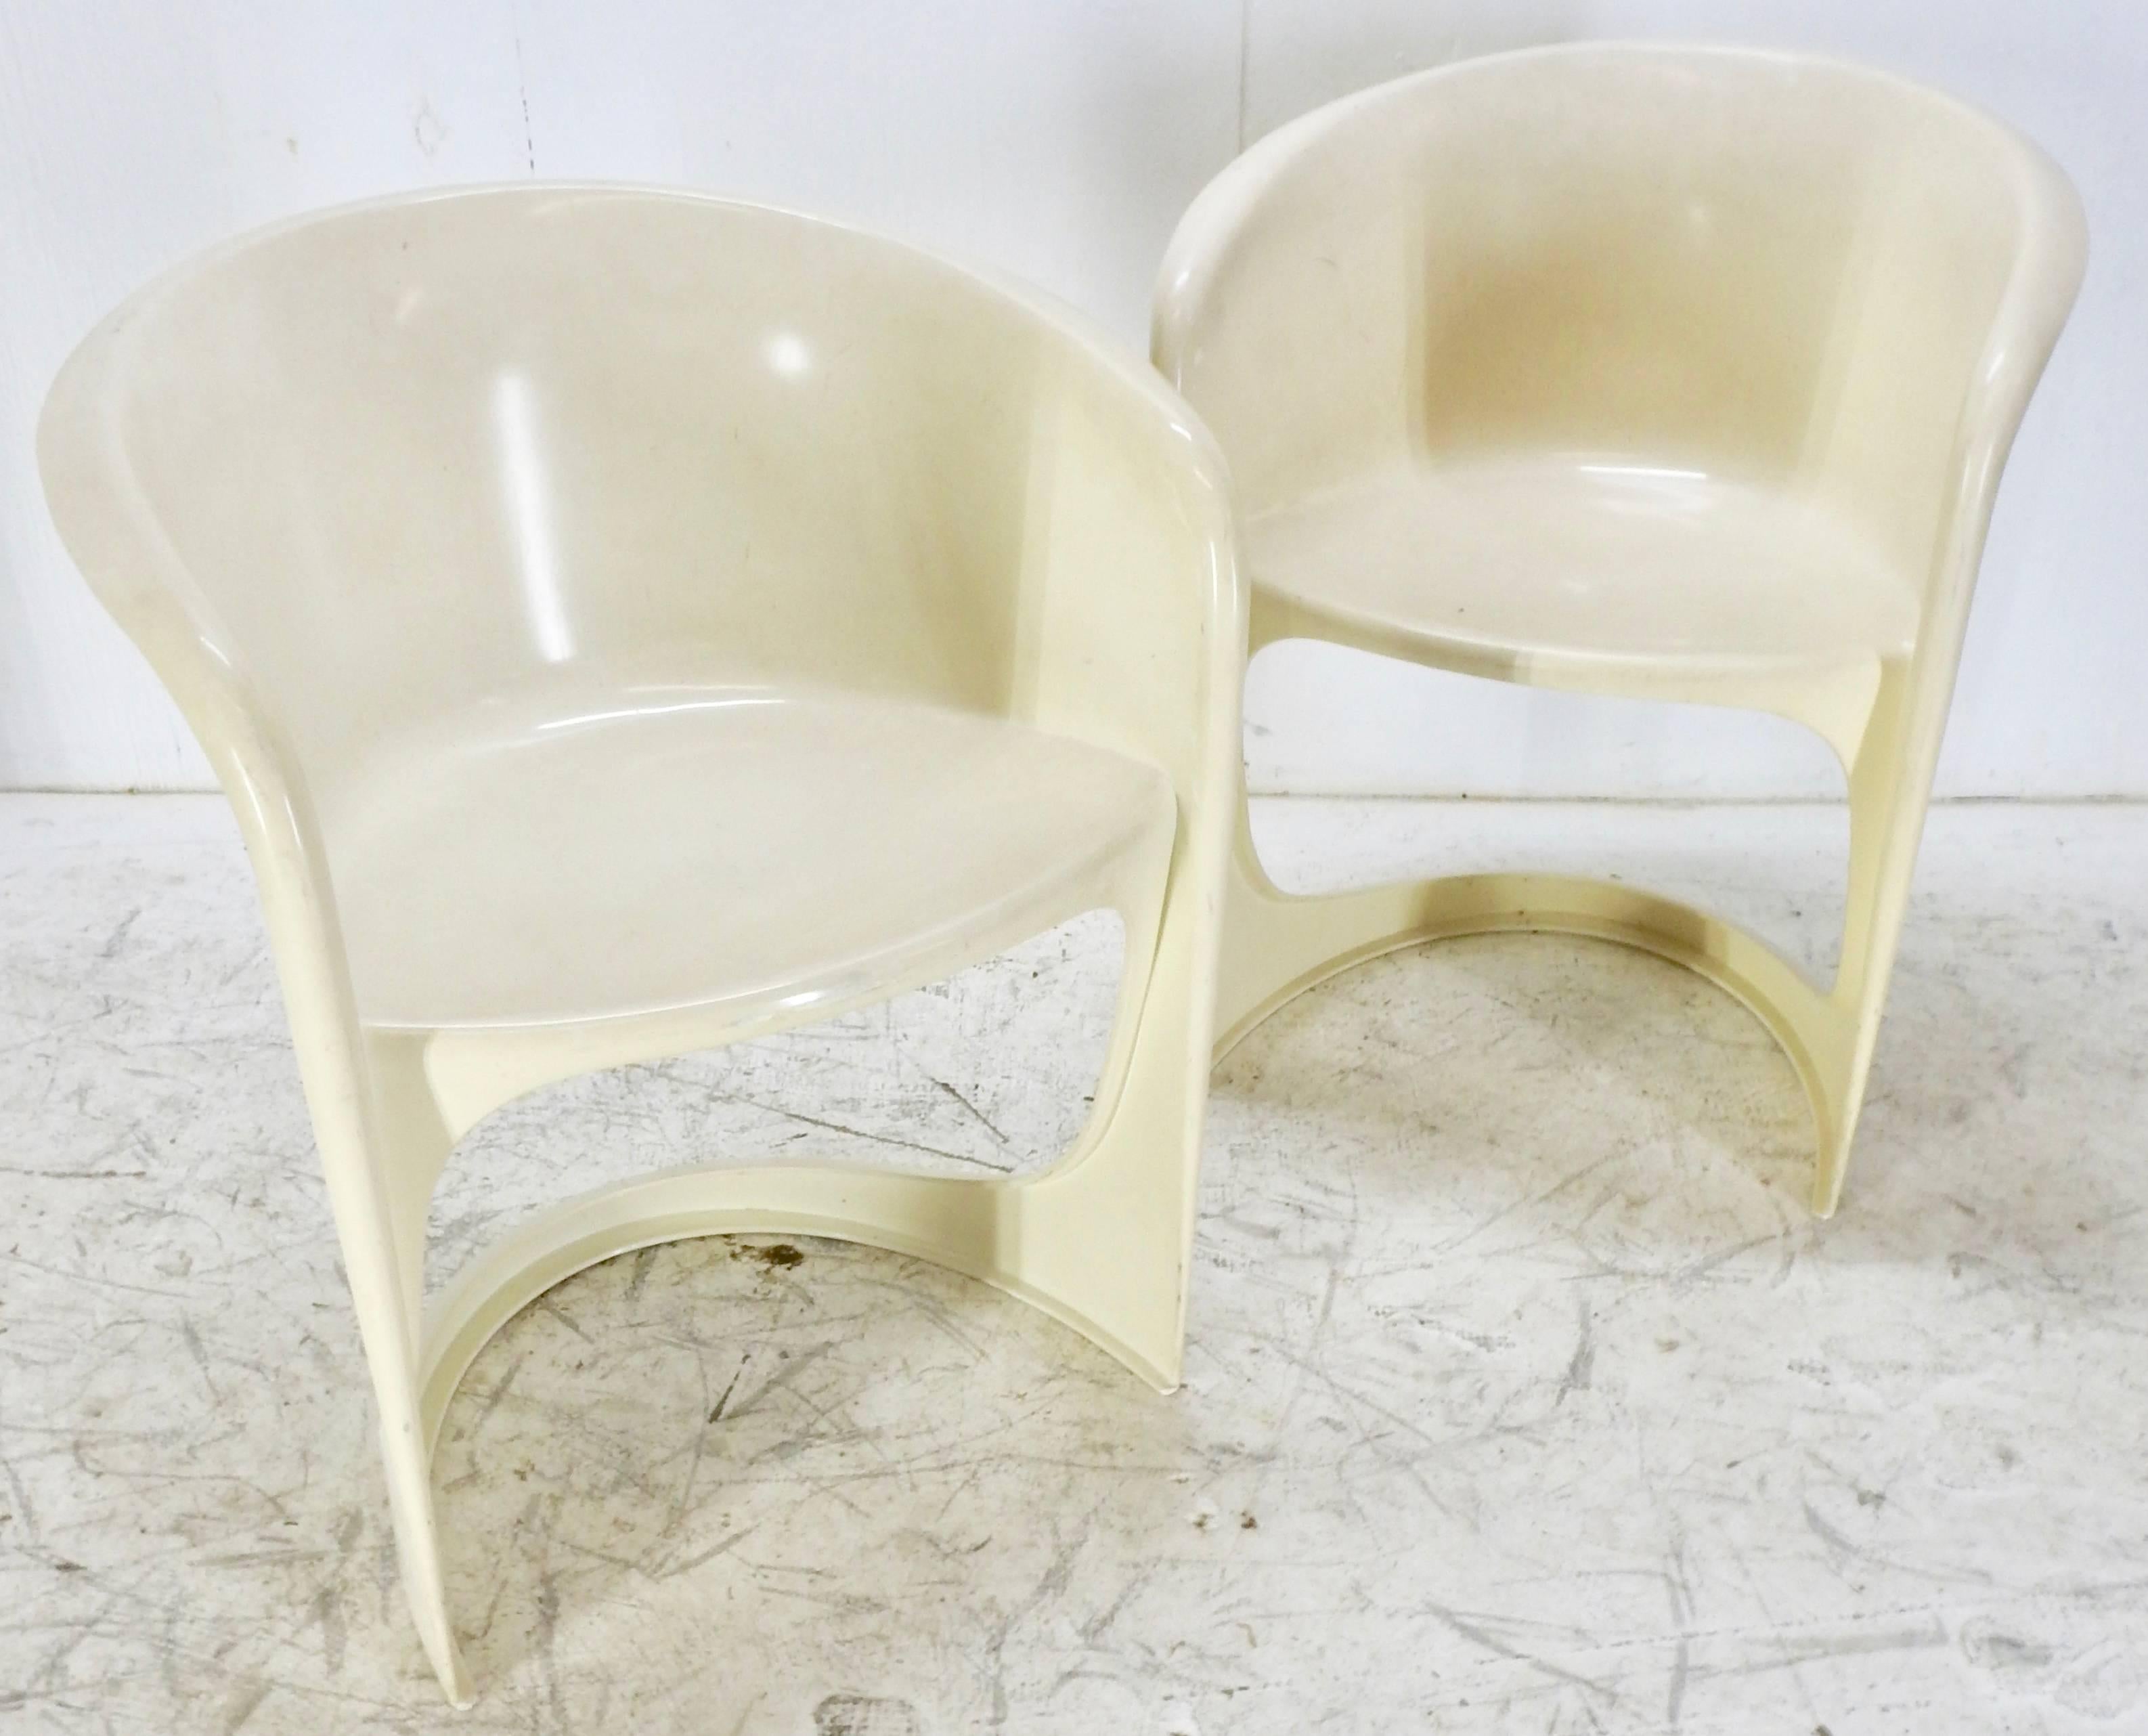 This is a stunning pair of Mid-Century Modern molded chairs by the Danish firm Cado. These were designed by architect and designer Steen Ostergaard (born 1935). Each chair features an arch crest with rolled edge over a molded barrel back with